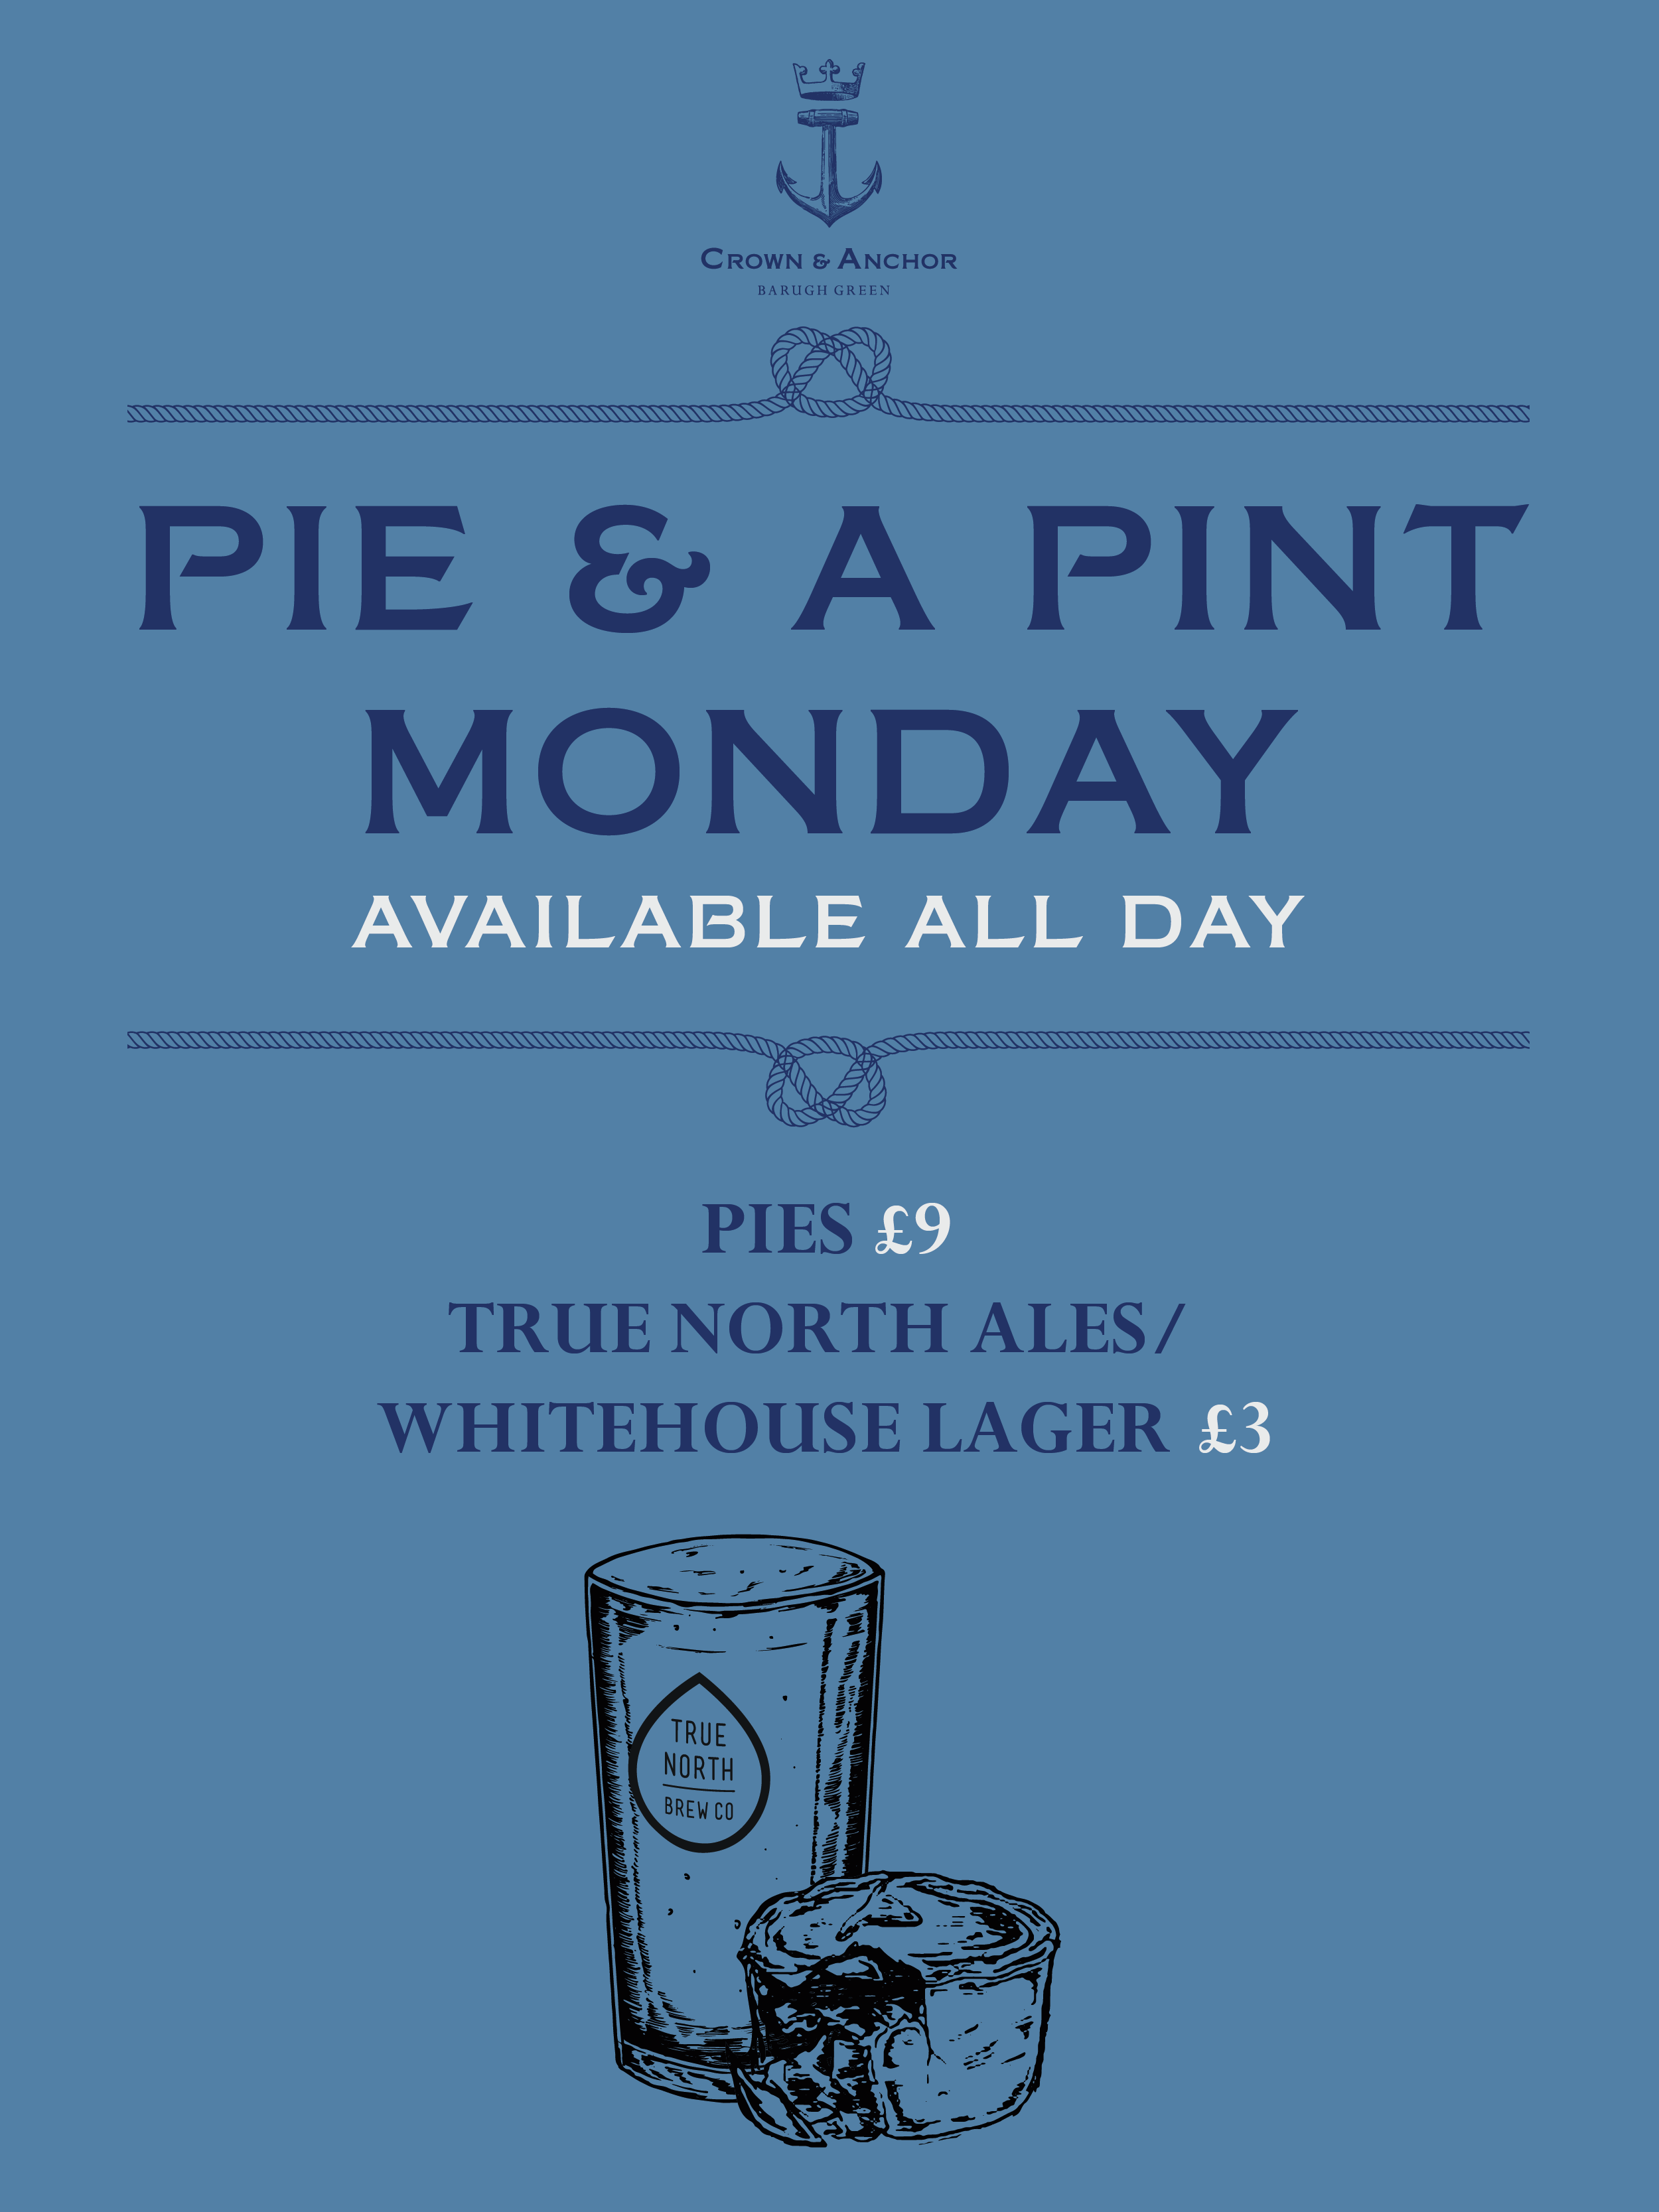 Pie Monday at The Crown & Anchor